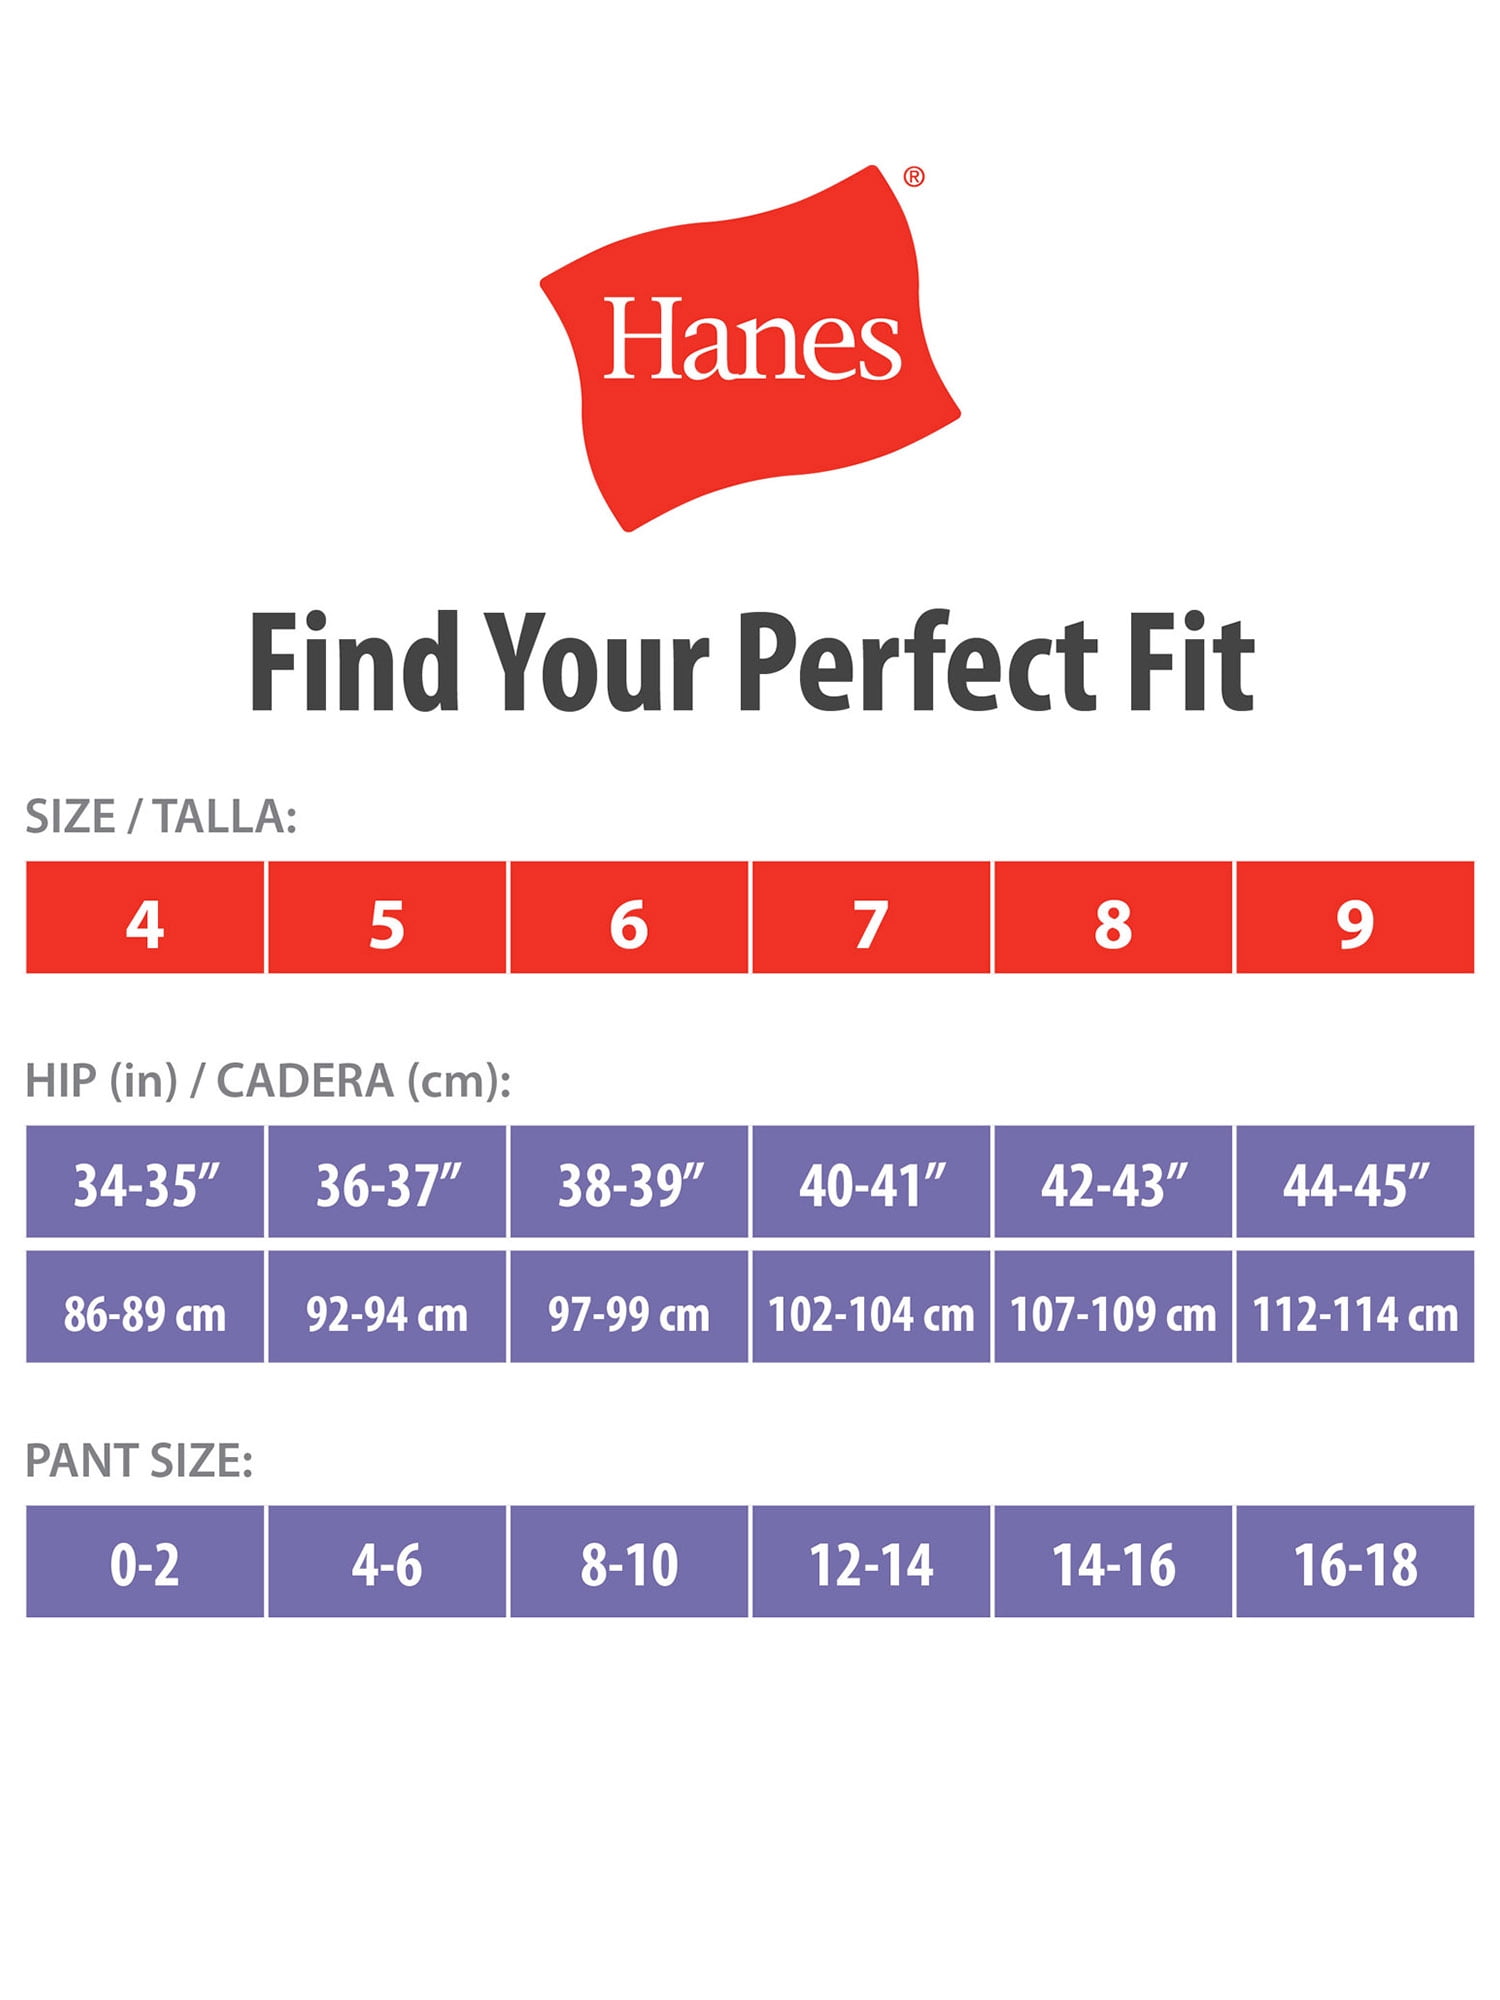  Hanes Womens Cotton Hi Cut Underwear, Available In Regular  And Plus Sizes Underwear, Assorted, 6 US, 12 Count